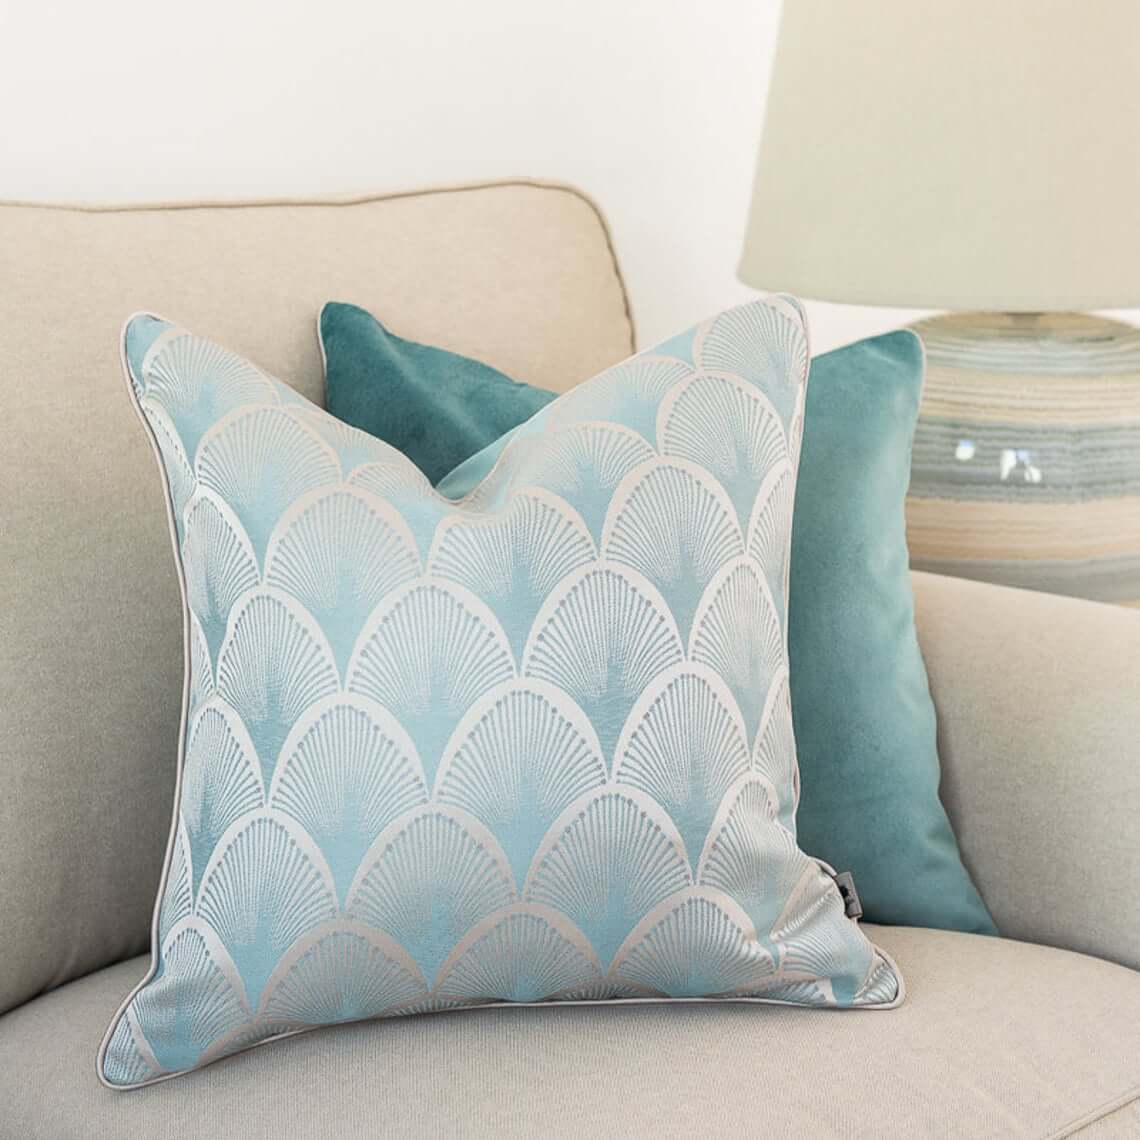 Peacock Printed Mint and Turquoise Pillows